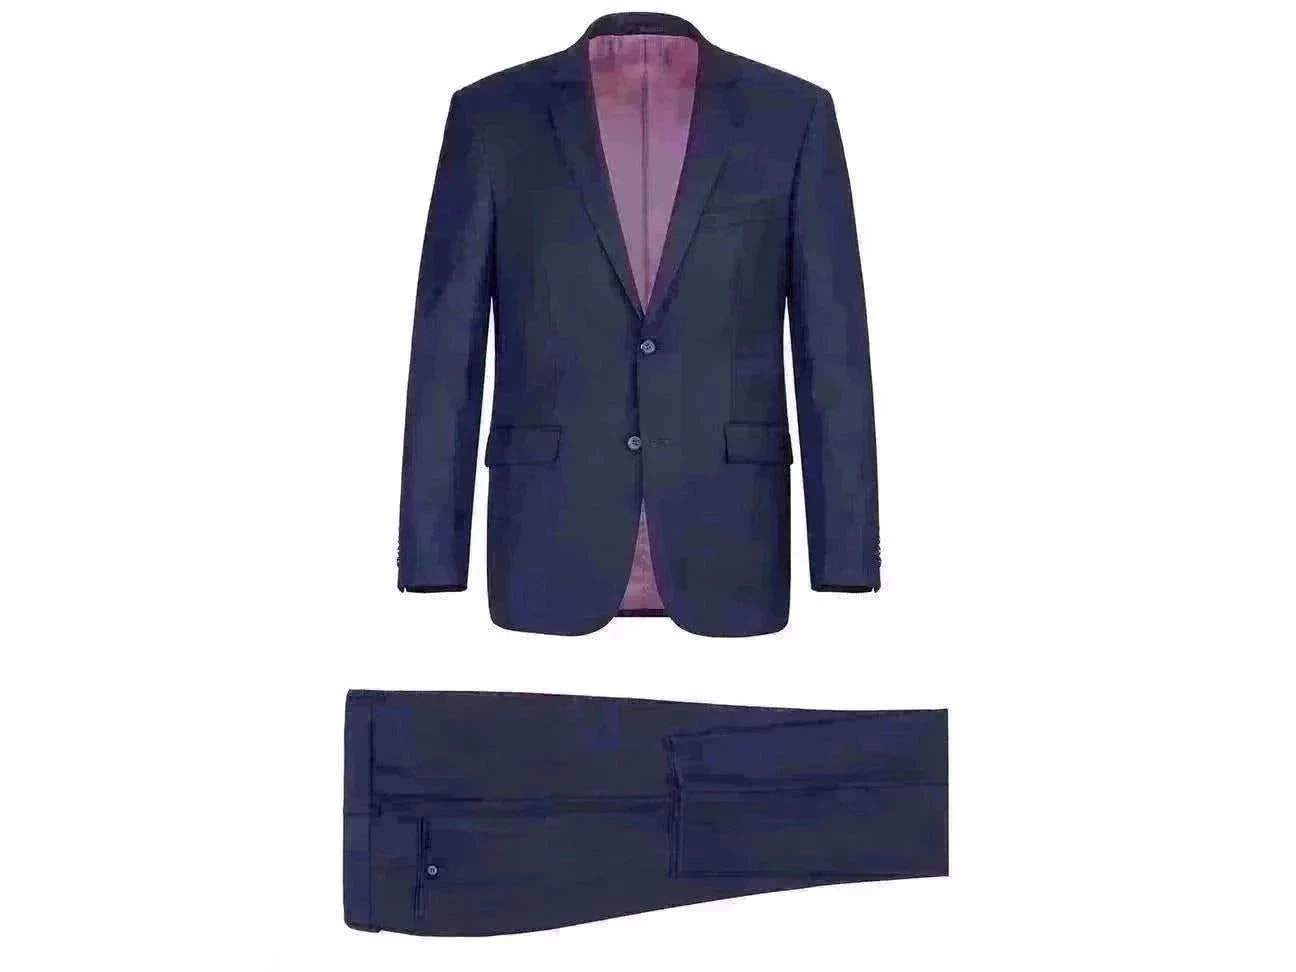 Rainwater's Luxury Collection Super 140's Wool Slim Fit Suit In New Navy - Rainwater's Men's Clothing and Tuxedo Rental